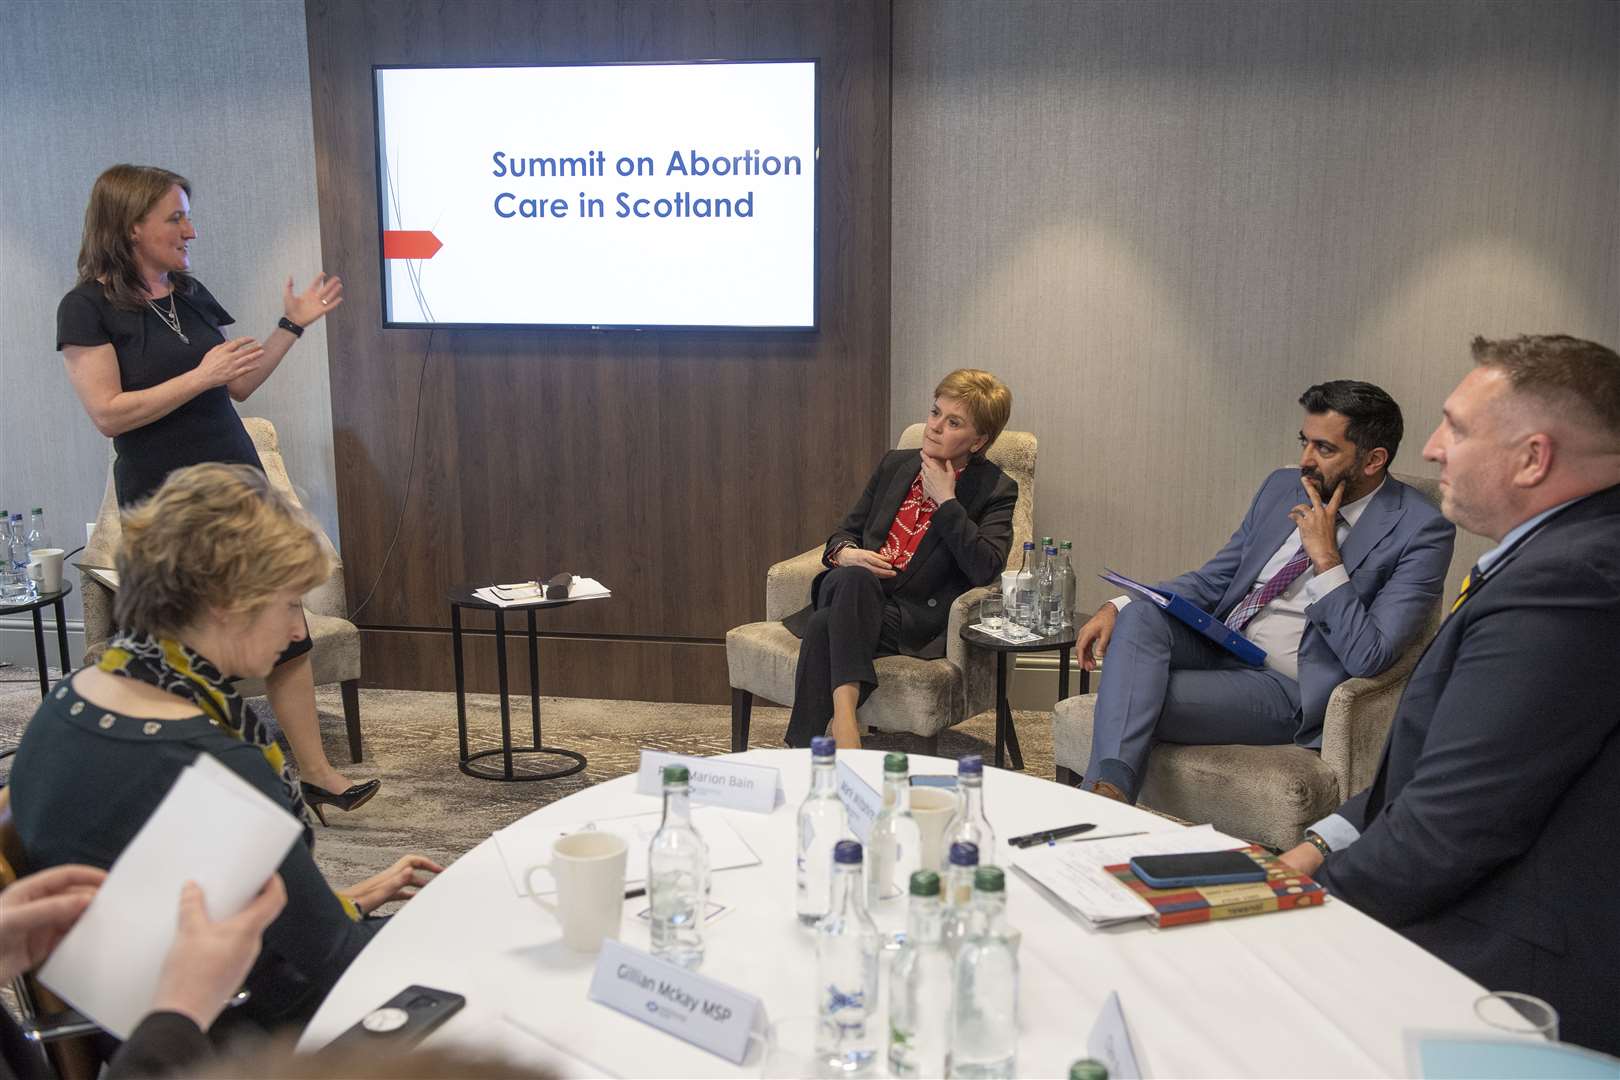 Maree Todd MSP speaks during a summit on abortion care (Lesley Martin/PA)